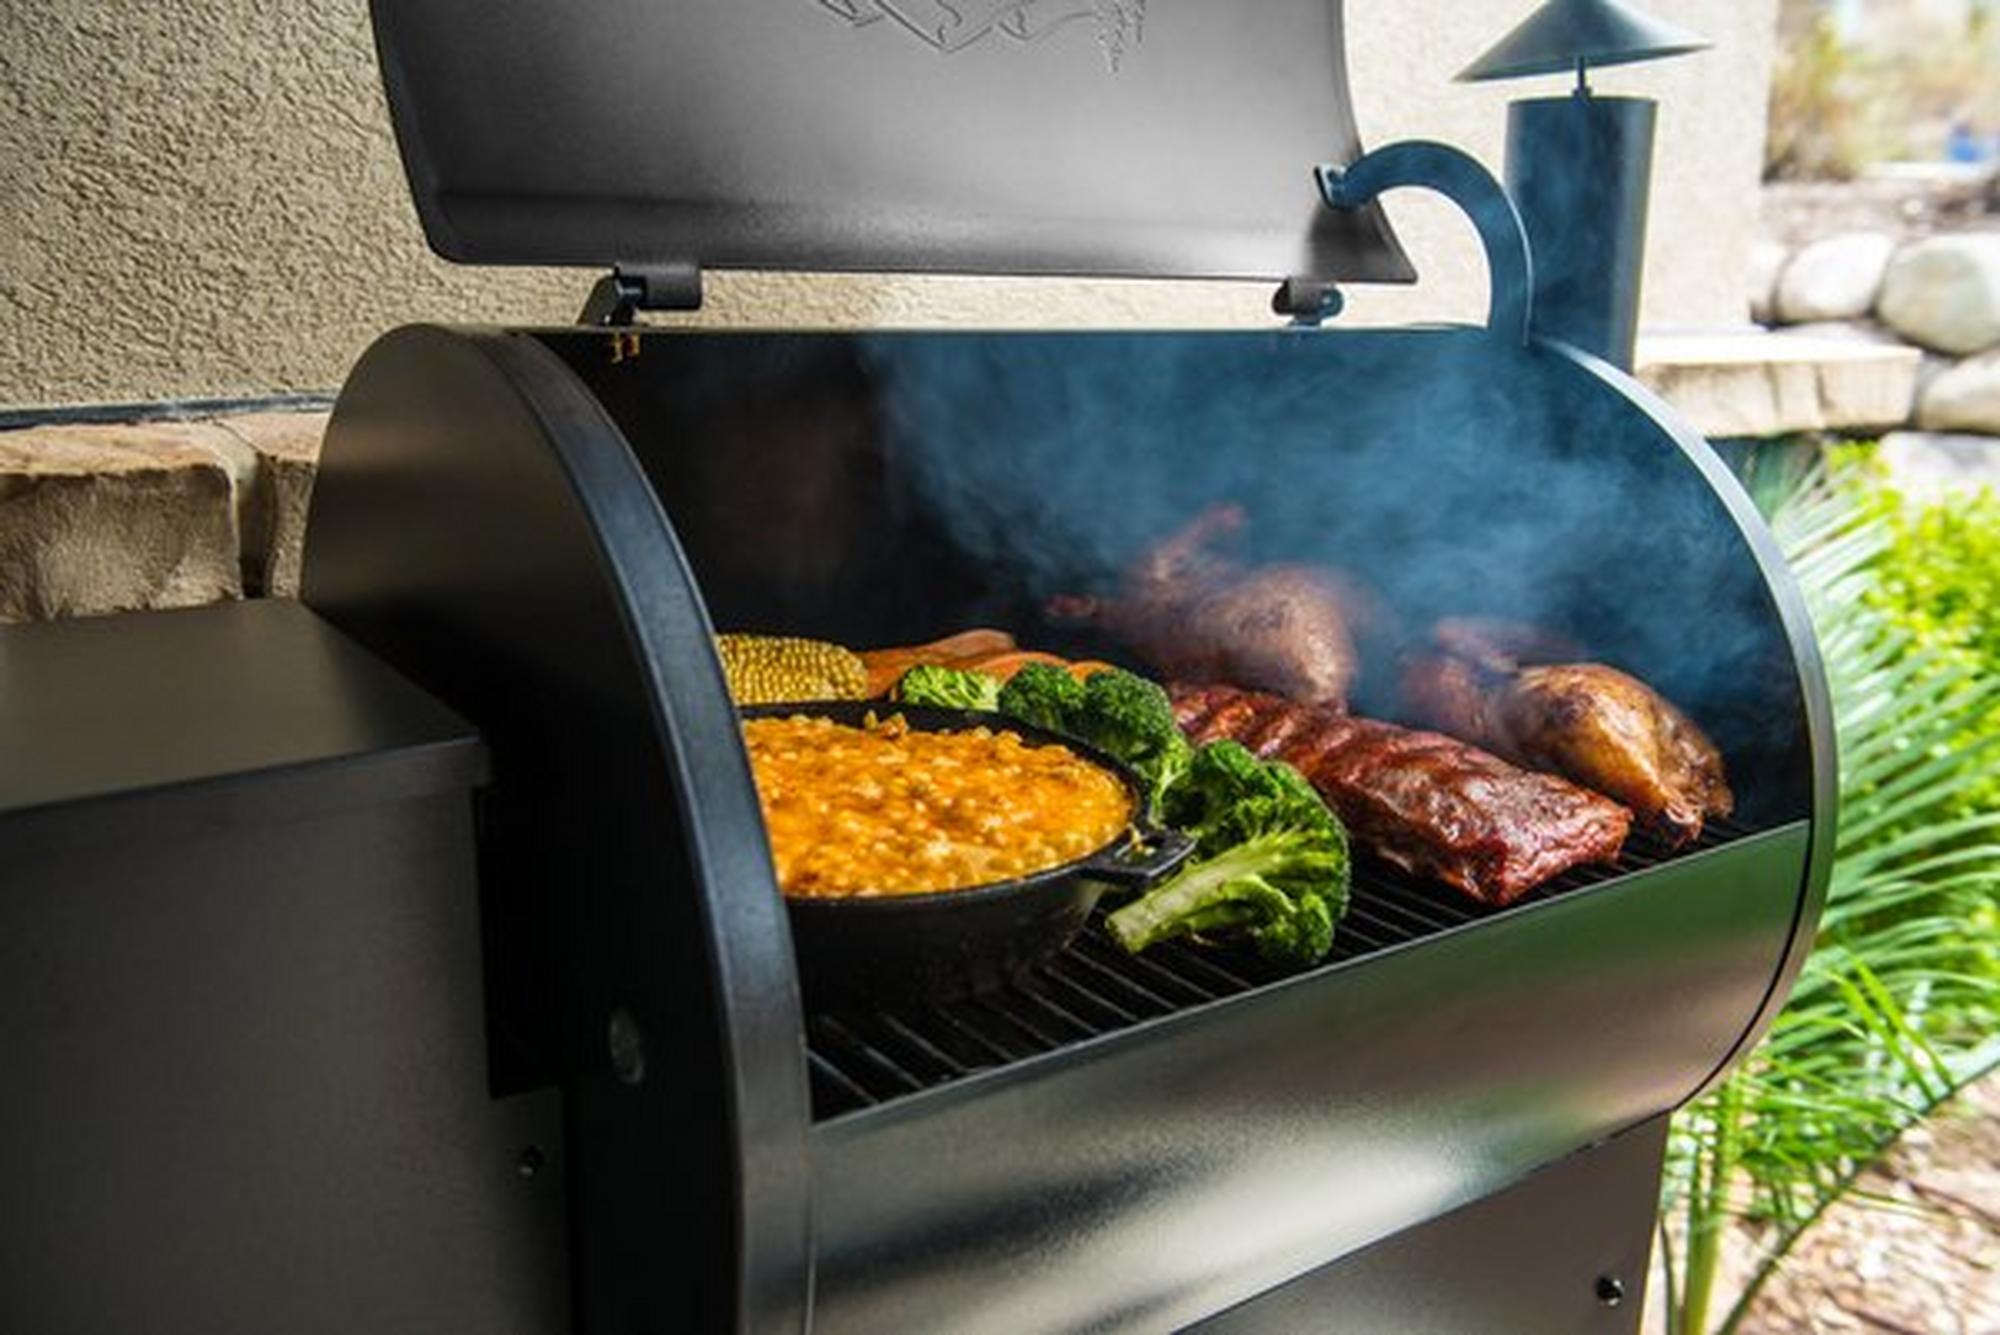 Traeger Pro Series 22 Bronze  Pellet Grill Lifestyle Grilling Chickens and Steaks